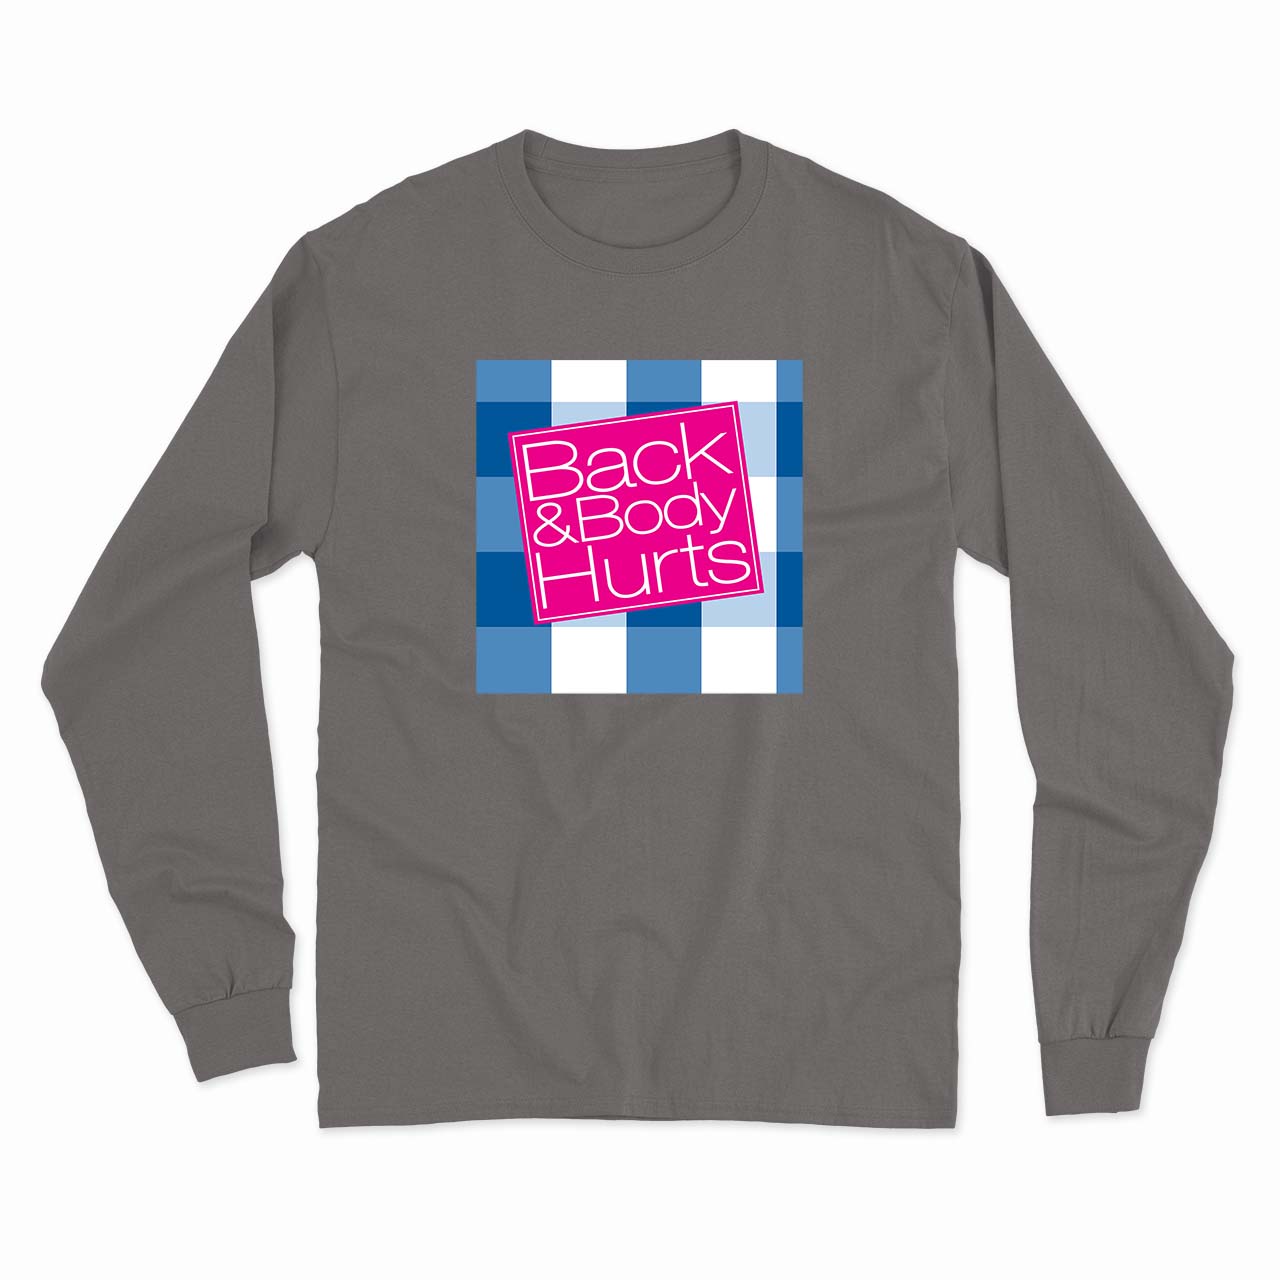 Daydream Tees Back & Body Hurts Long Sleeve Charcoal